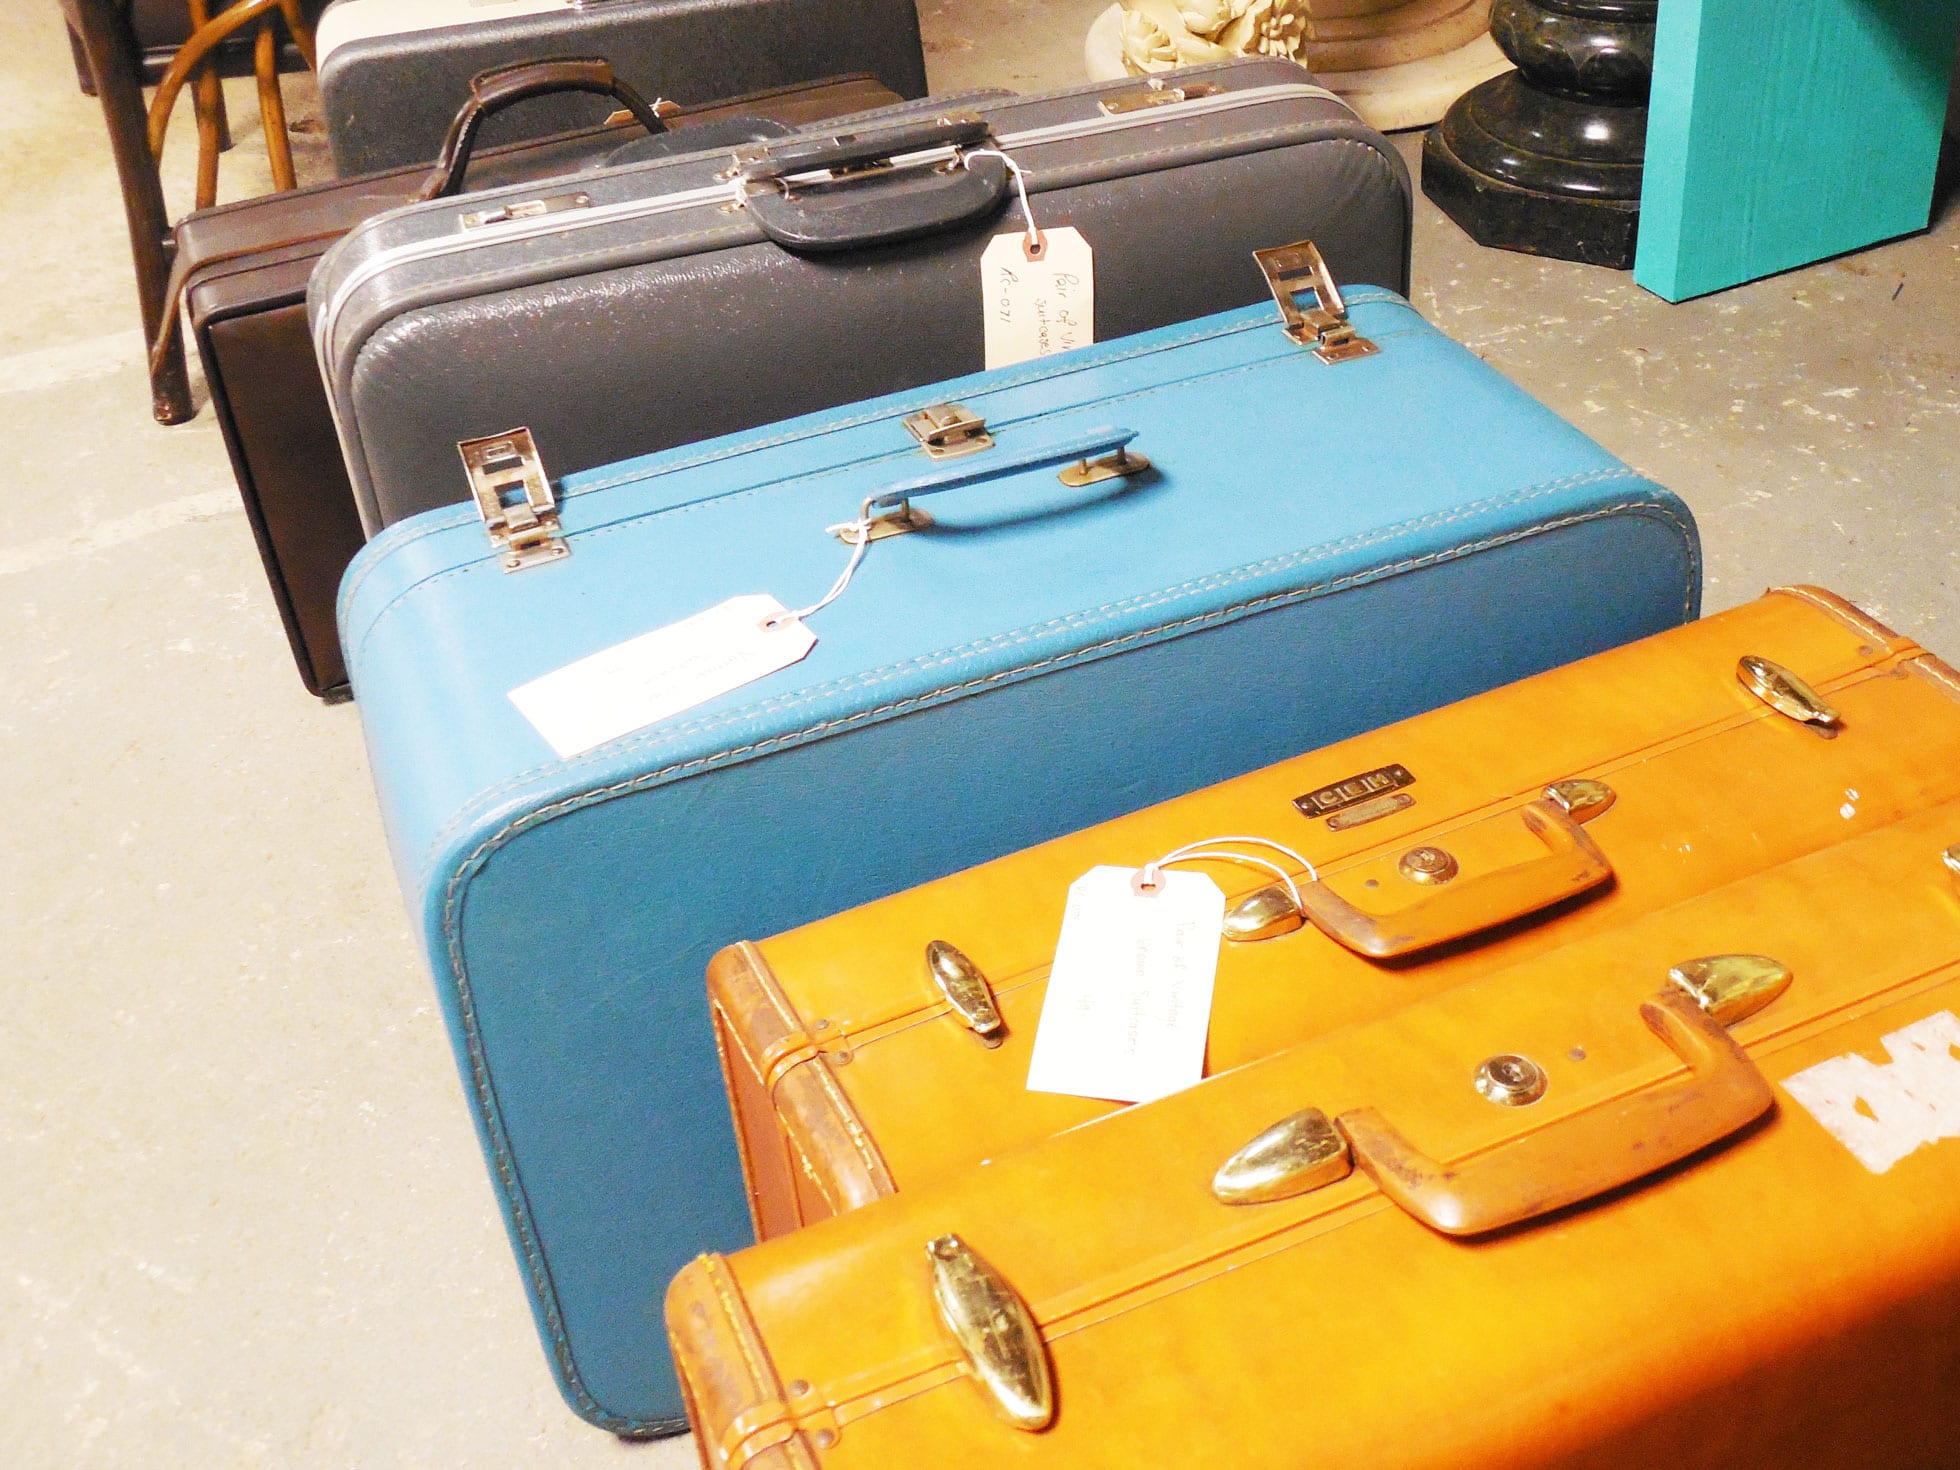 International visitors represented by different pieces of luggage